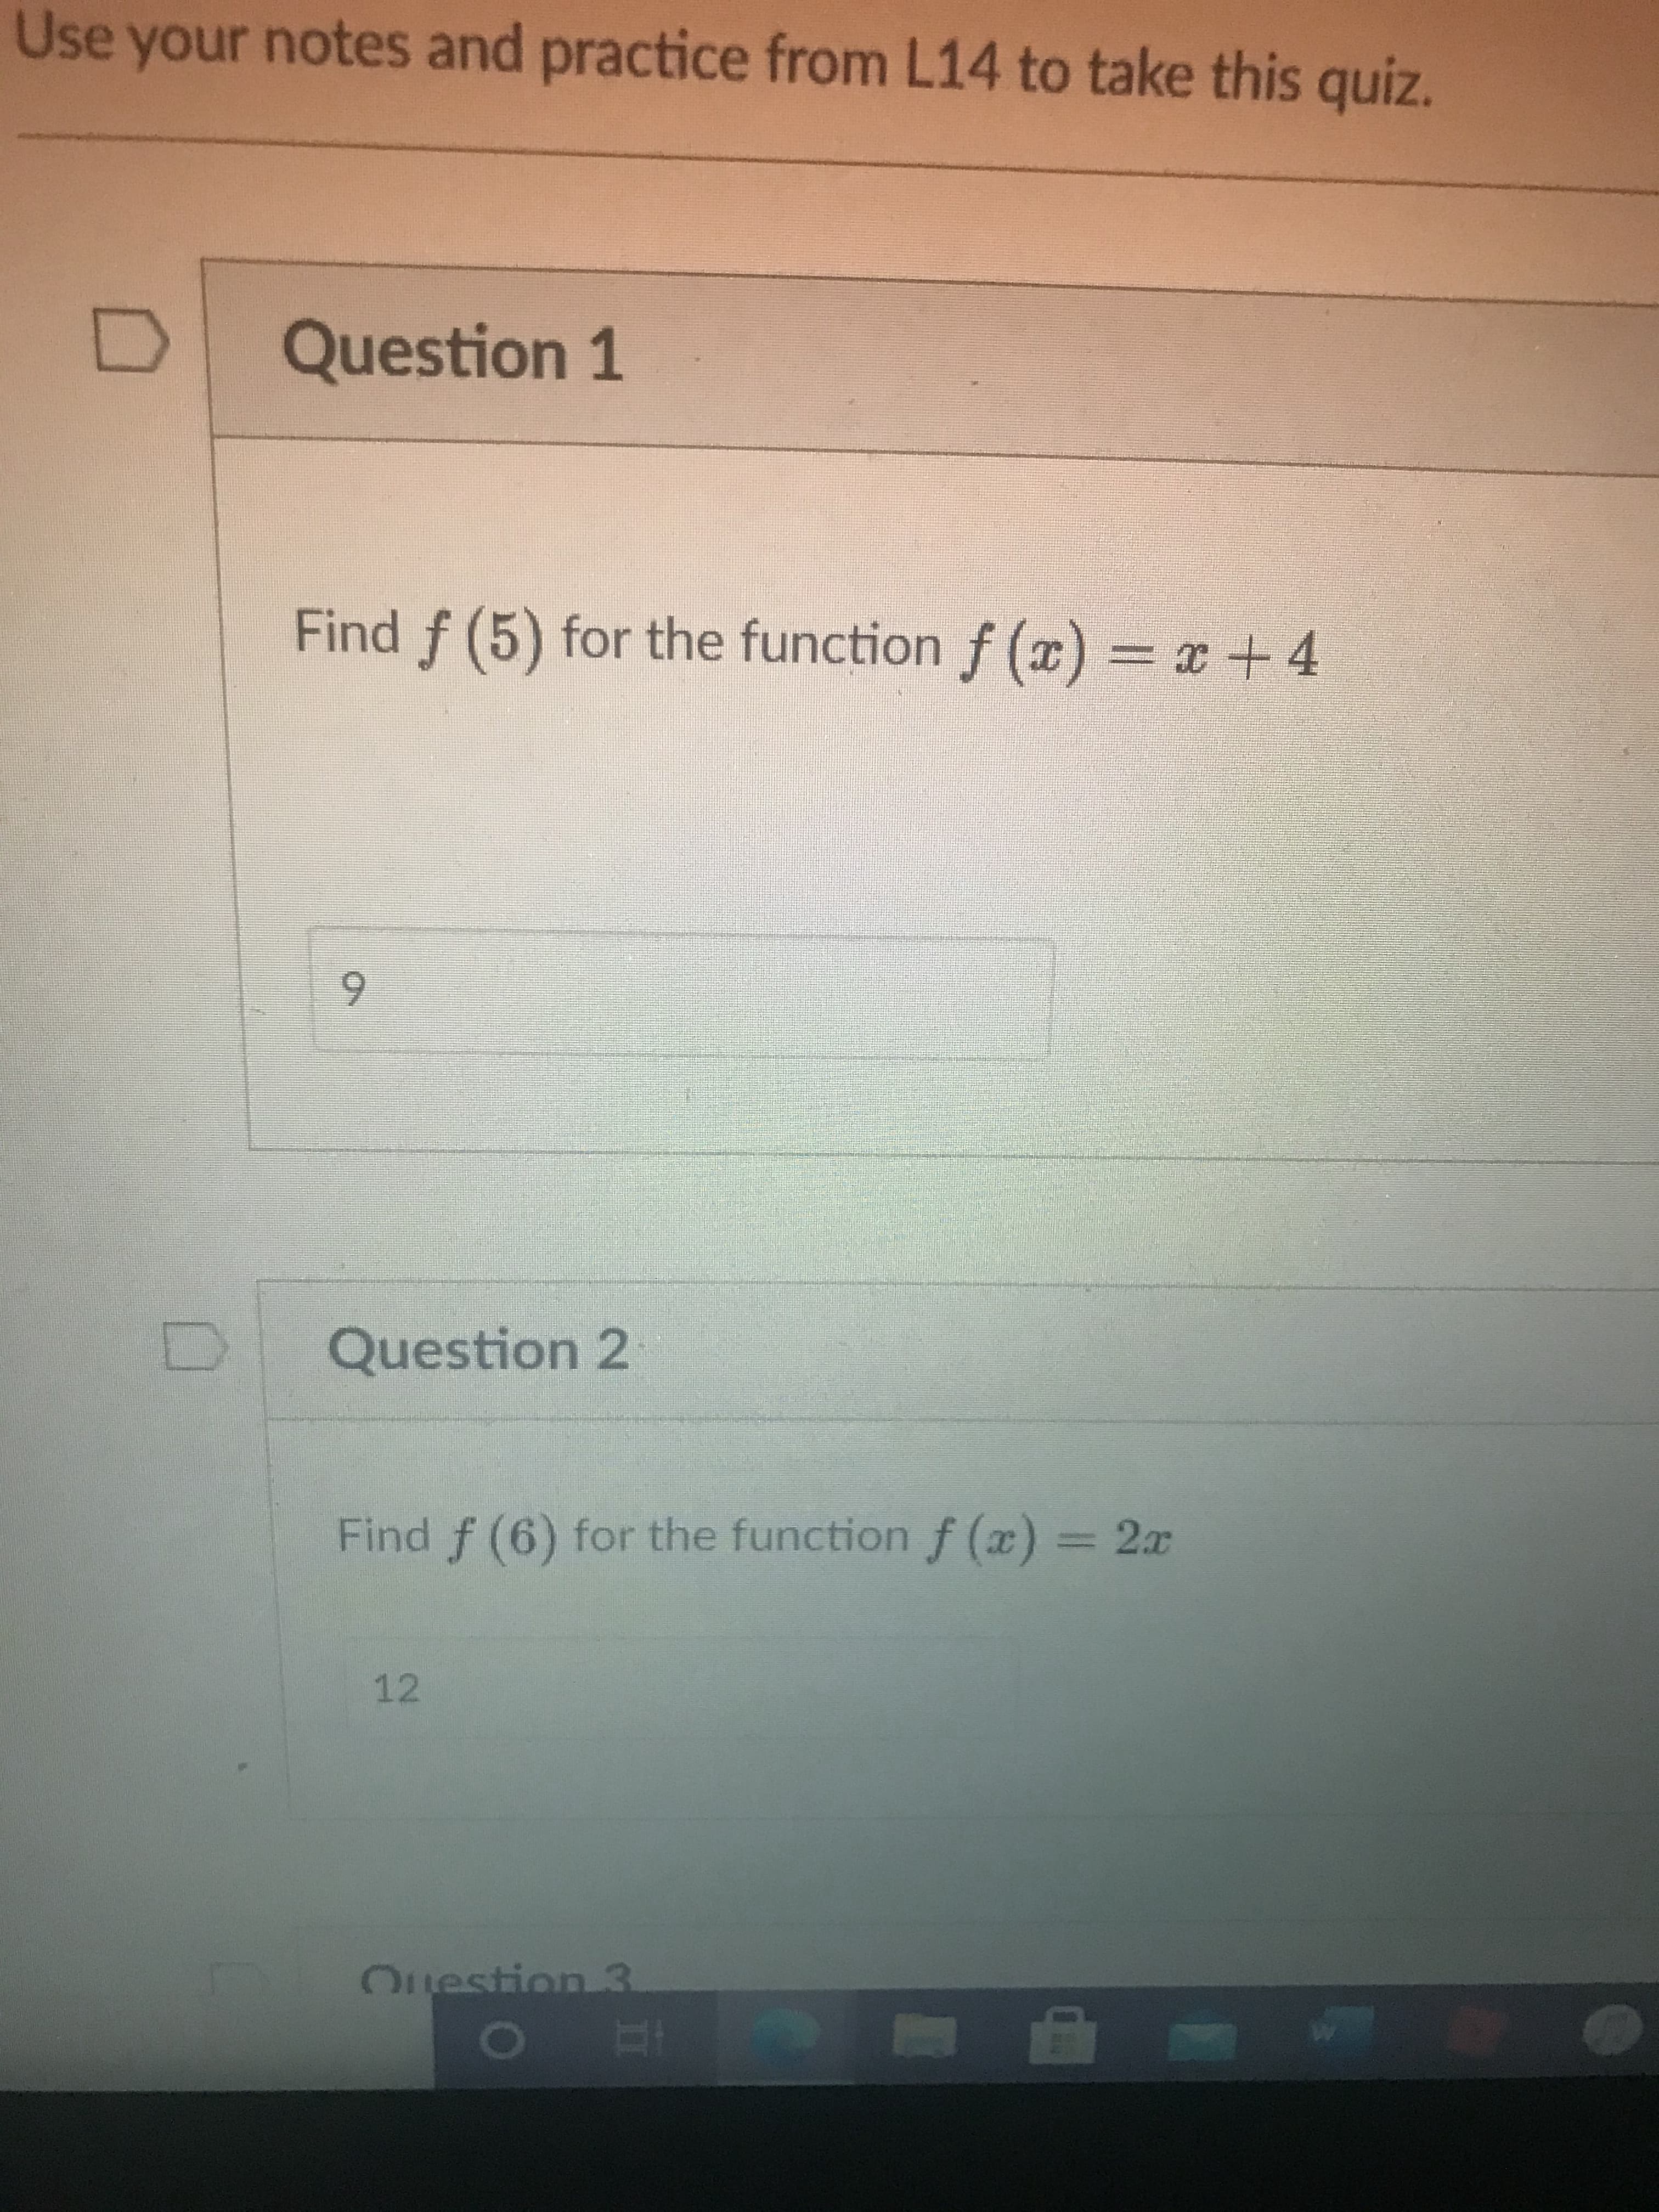 Find f (5) for the function f (x) = x+4
